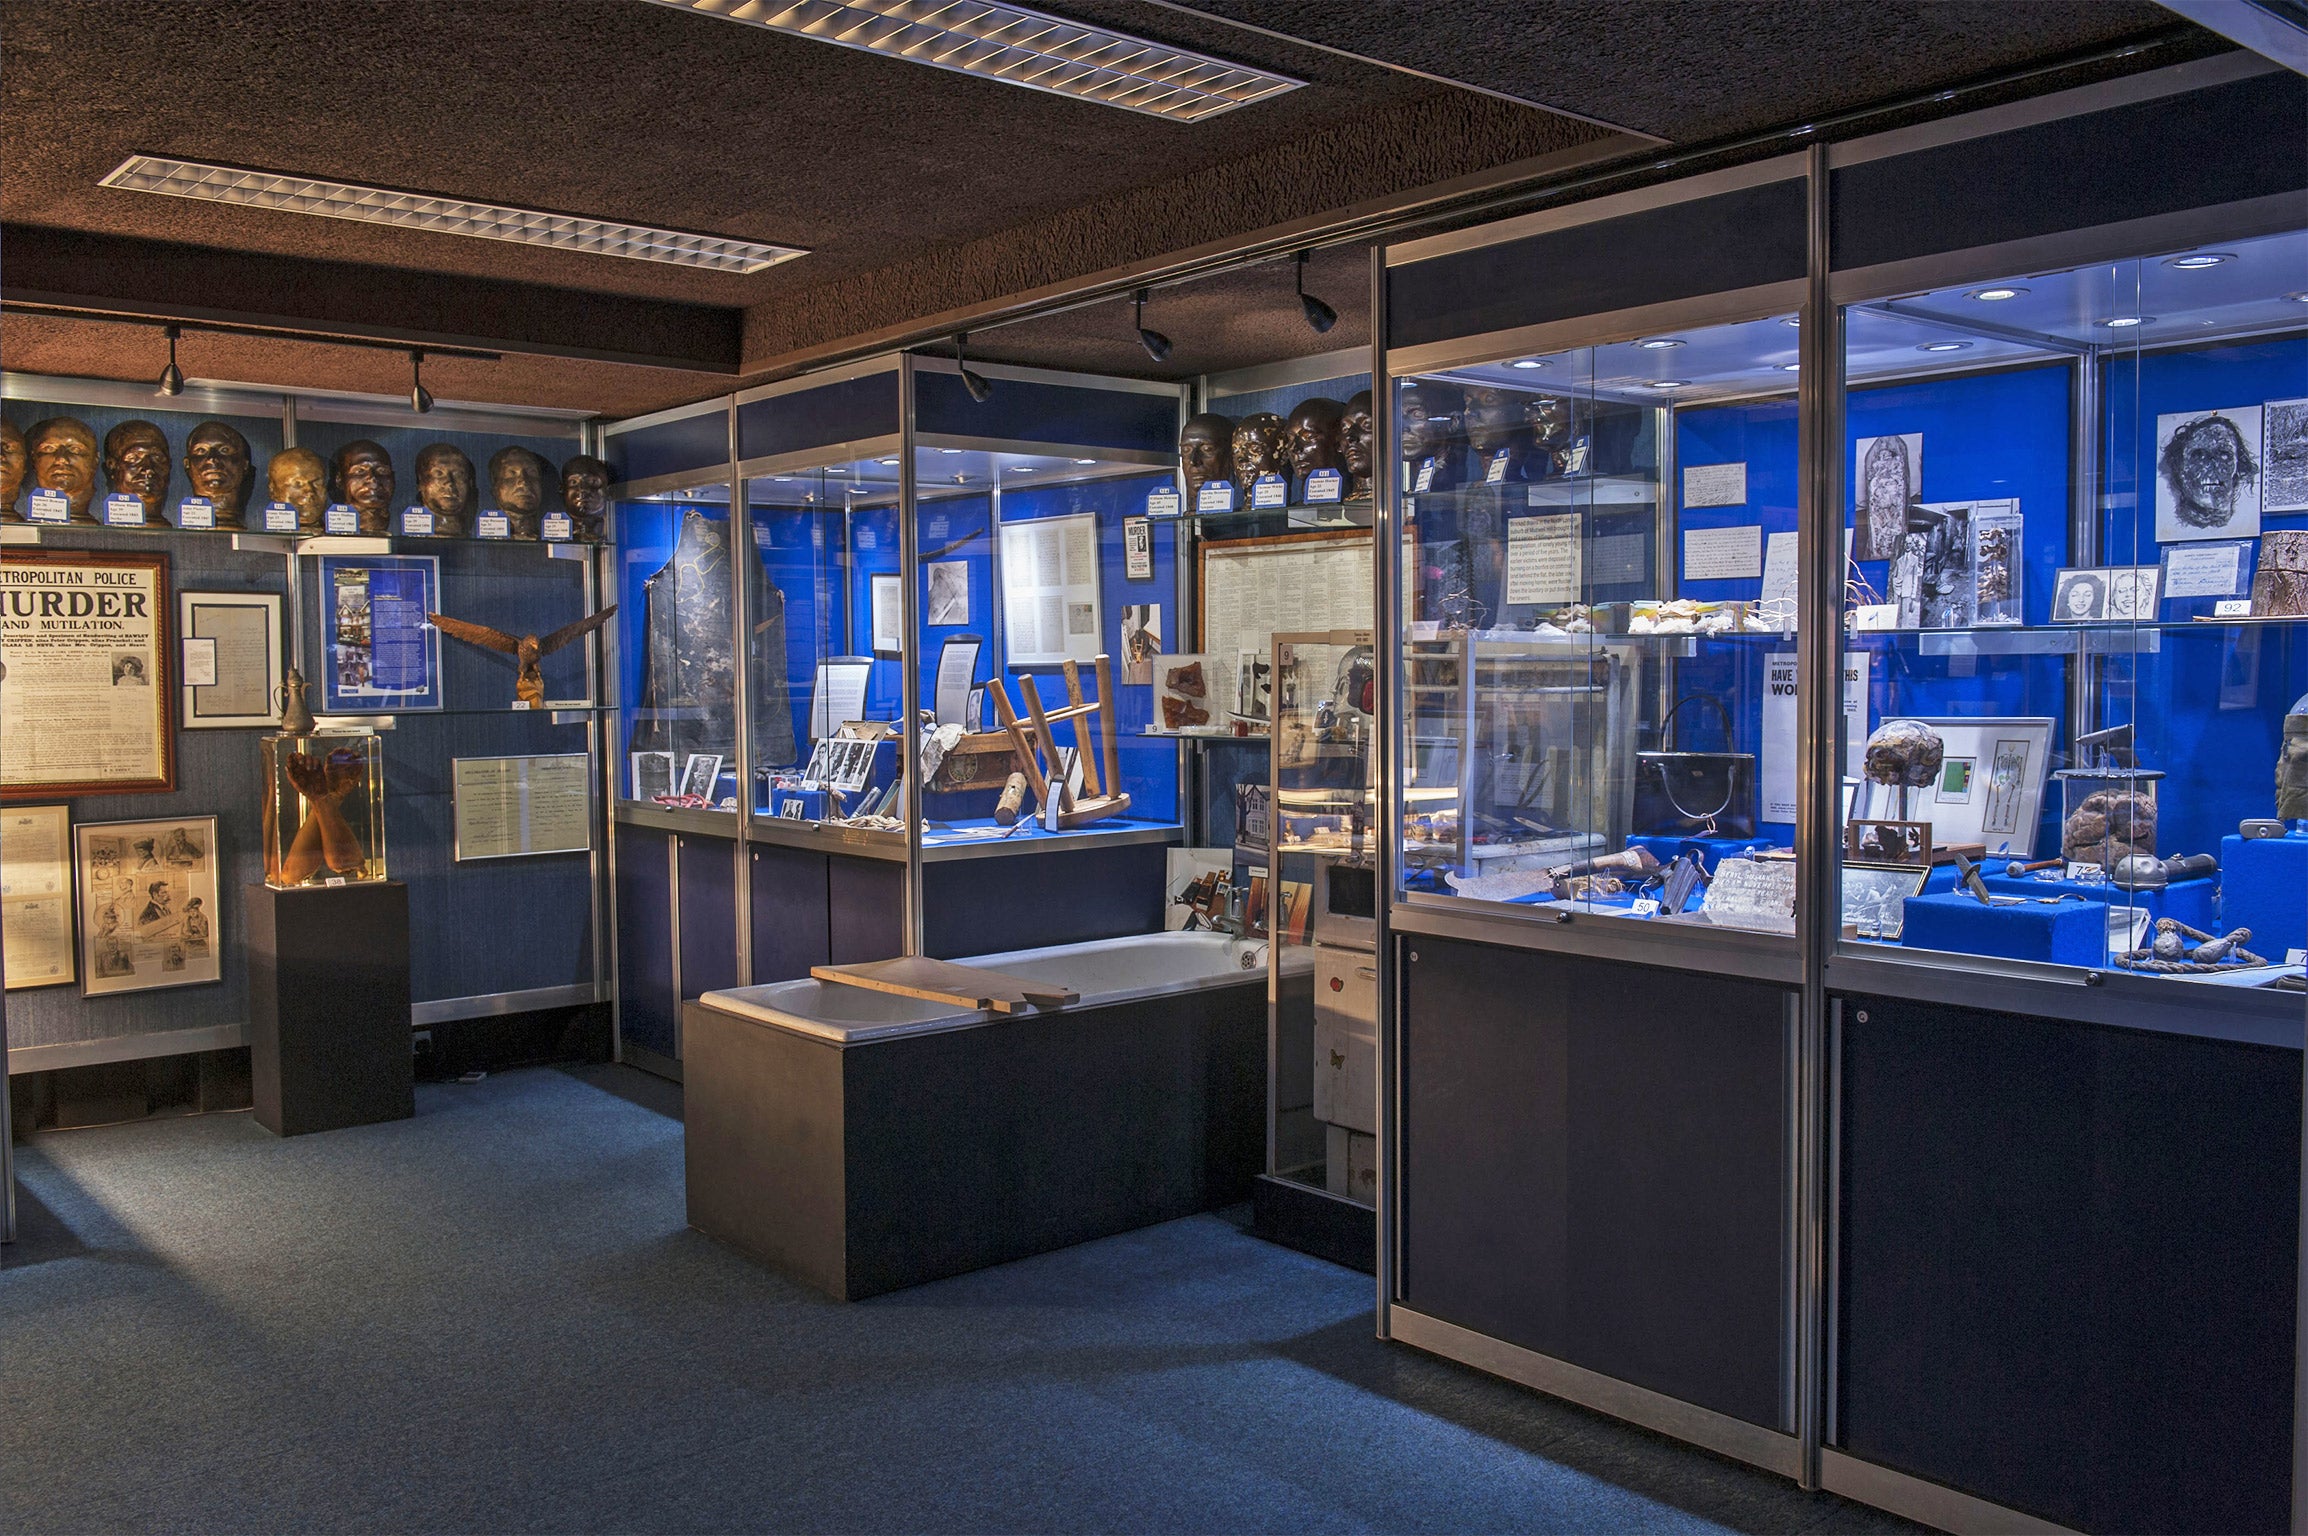 The Metropolitan Police’s Crime Museum, hidden until now from public view